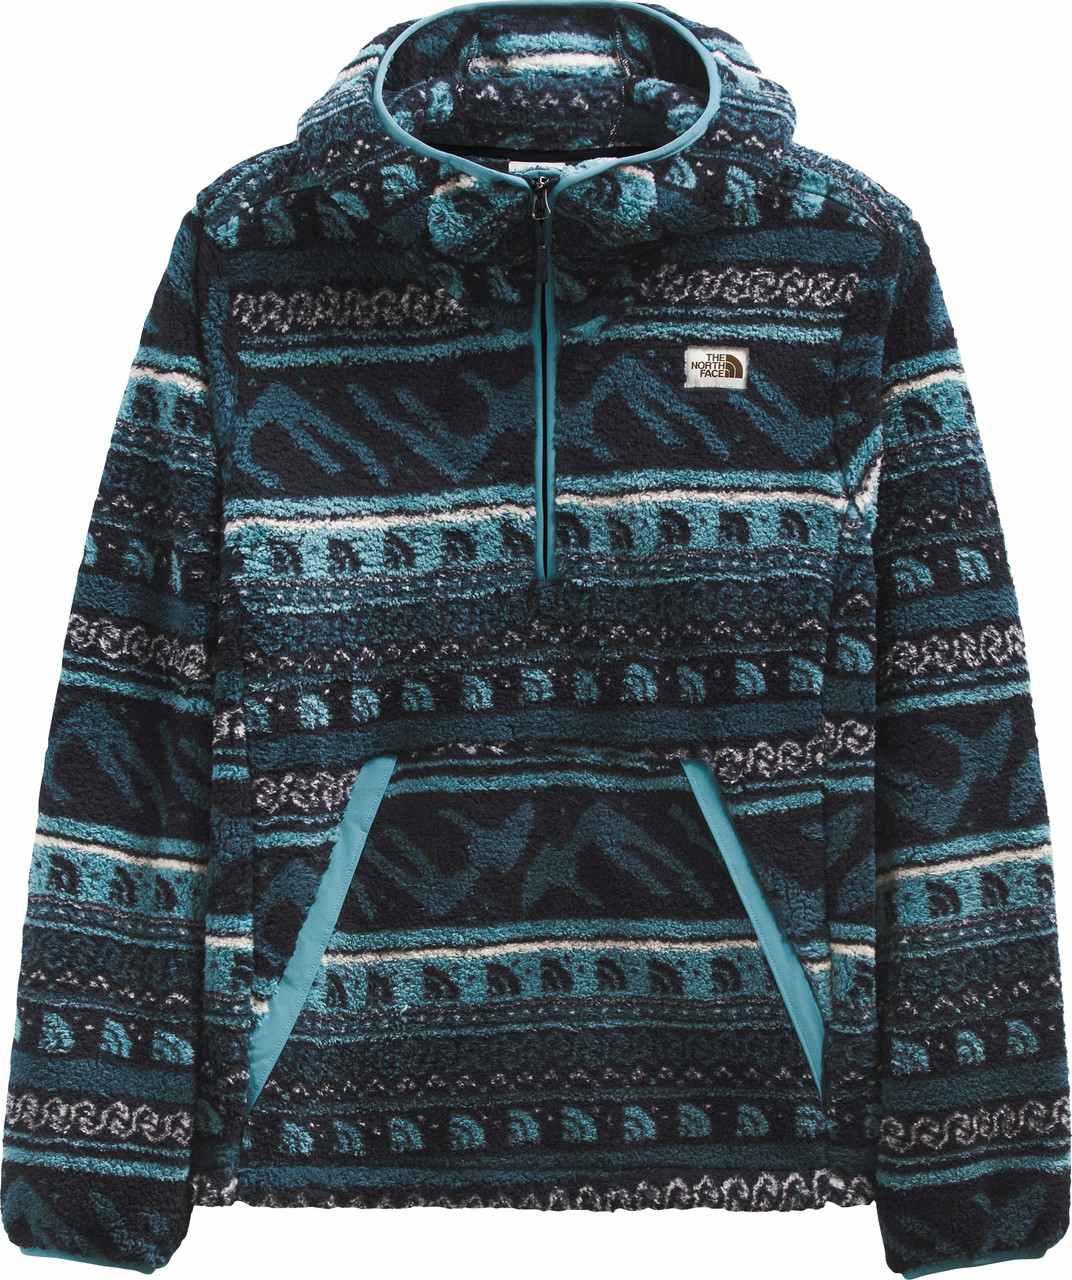 Printed Campshire Pullover Hoodie Aviator Navy TNF Mountain